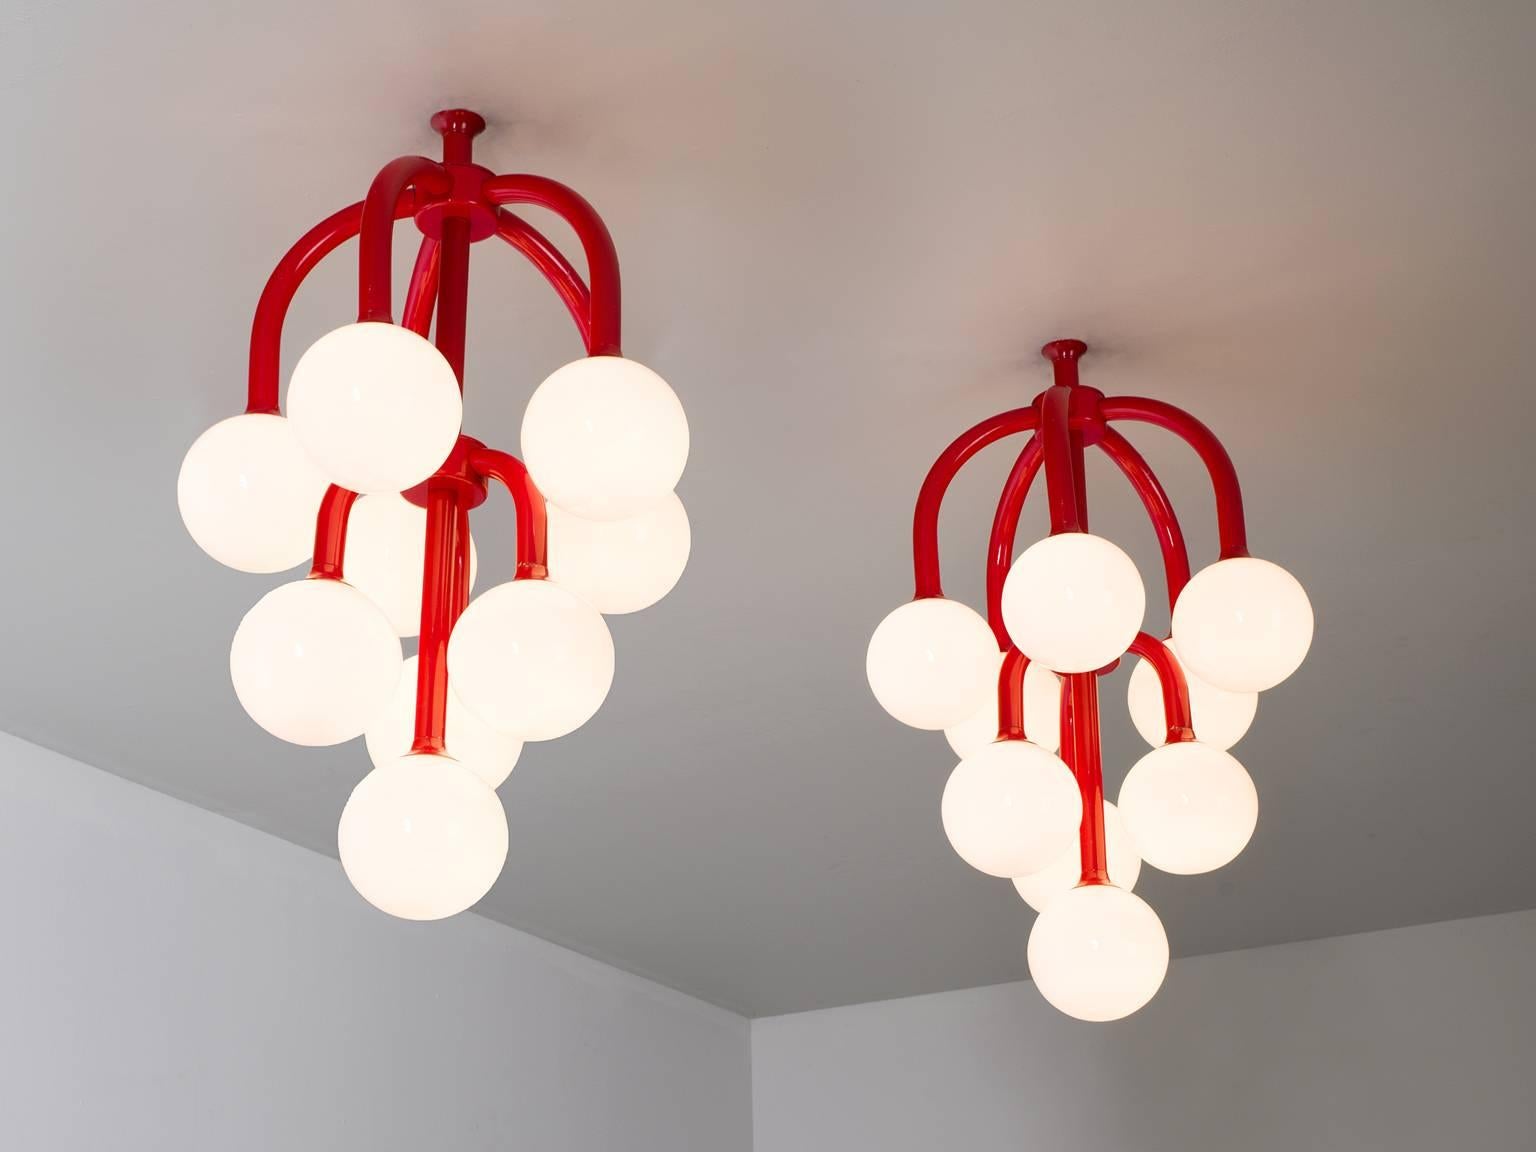 Set of two chandeliers, in metal and opaline glass, Scandinavia, 1970s.

Elegant pair of Sputnik-like chandeliers. The red coated metal fixture consist of several arches, all with an opal sphere at the end. The light is divided over three levels.